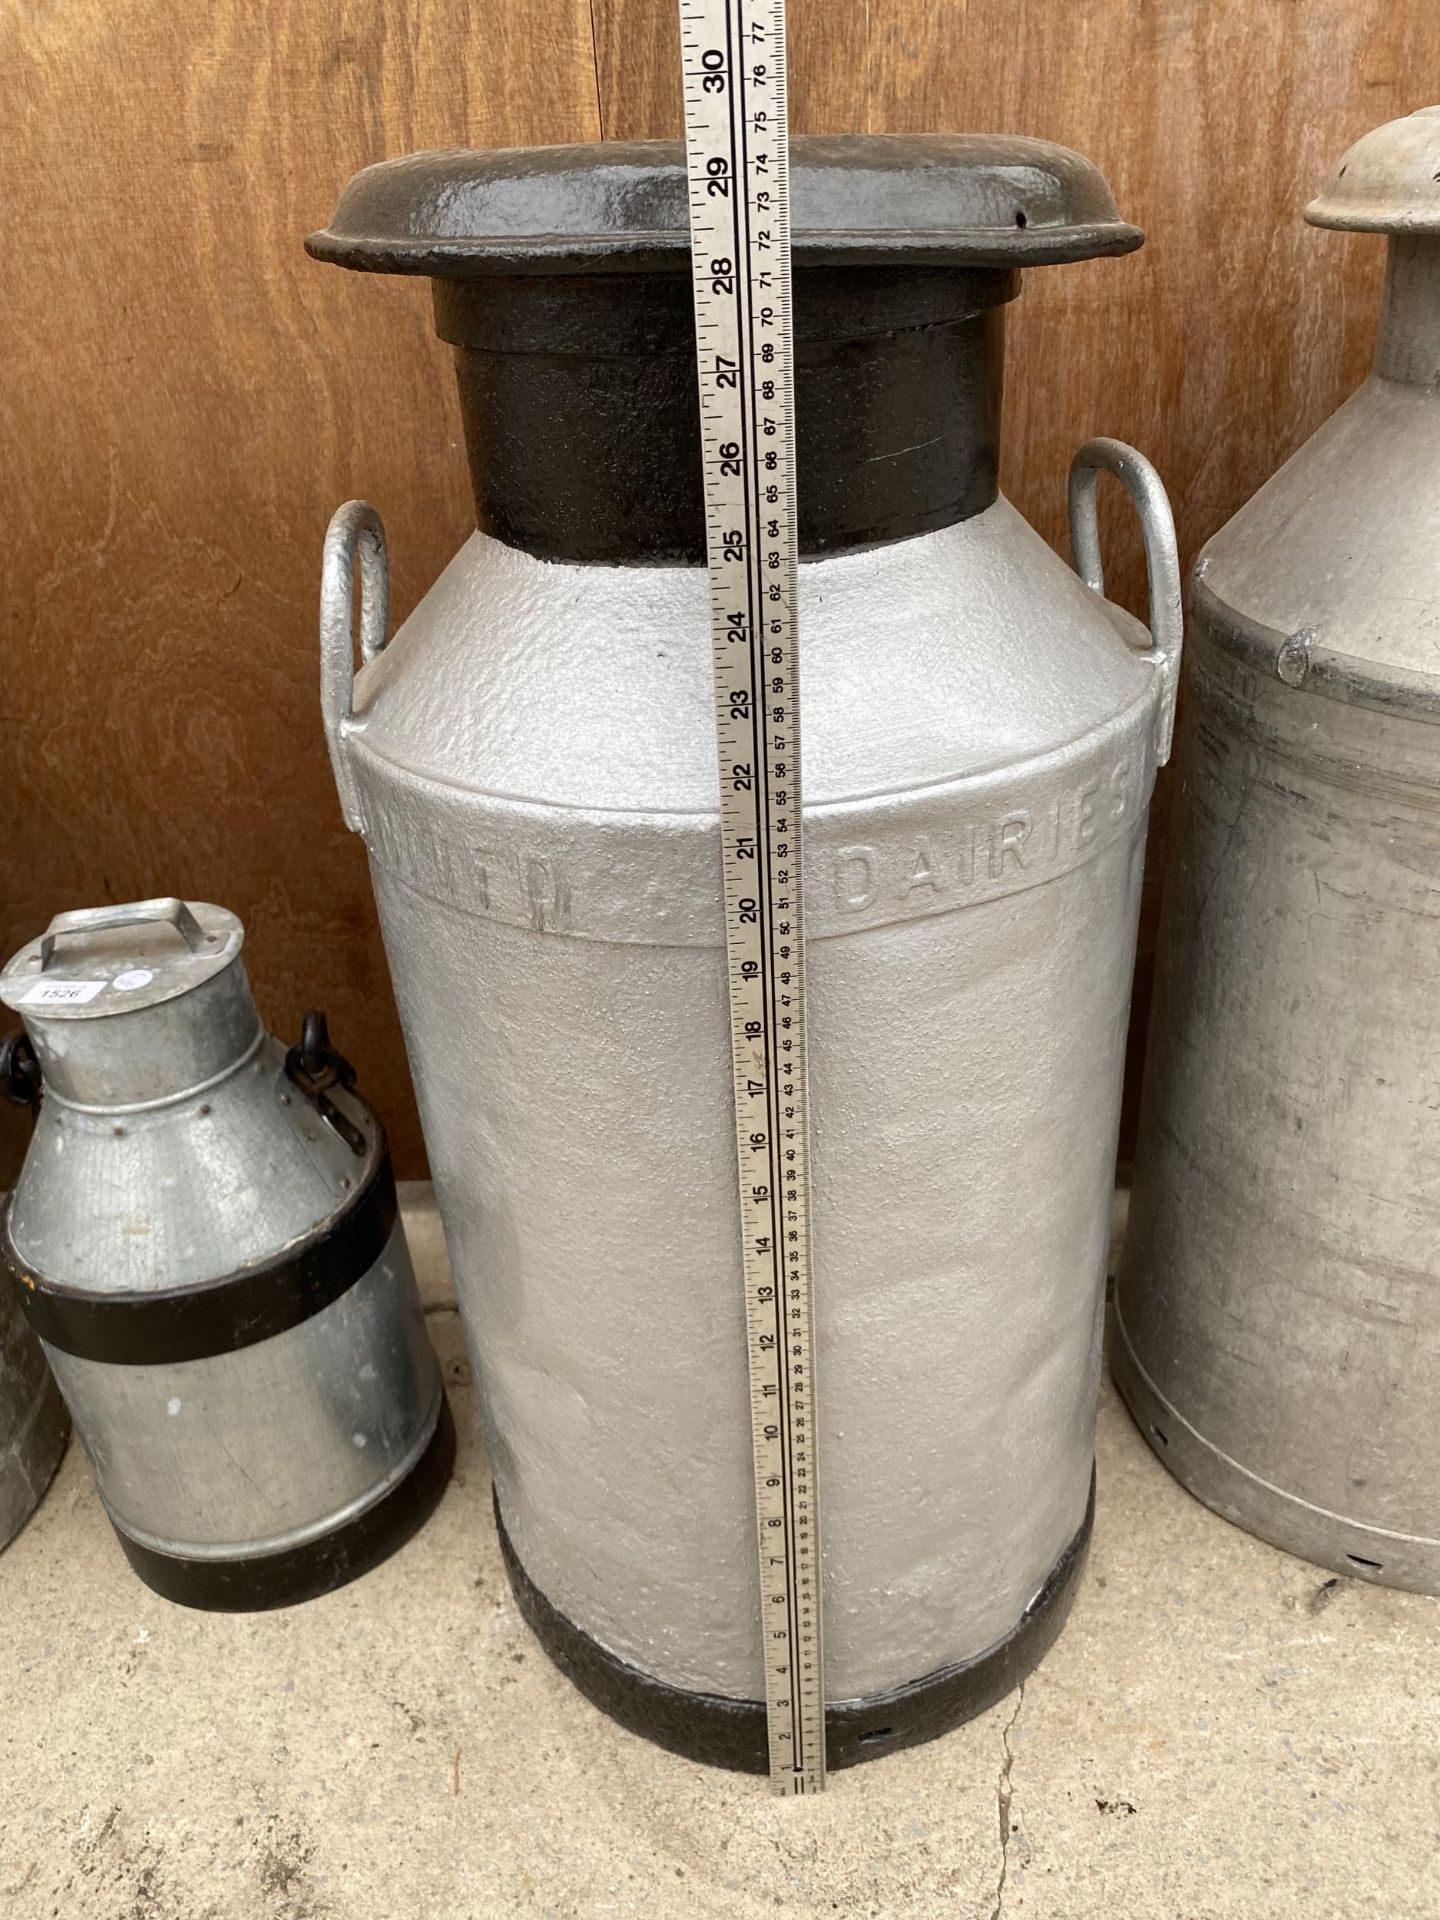 AN ALUMINIUM 'UNITED DAIRIES' MILK CHURN COMPLETE WITH LID - Image 2 of 2